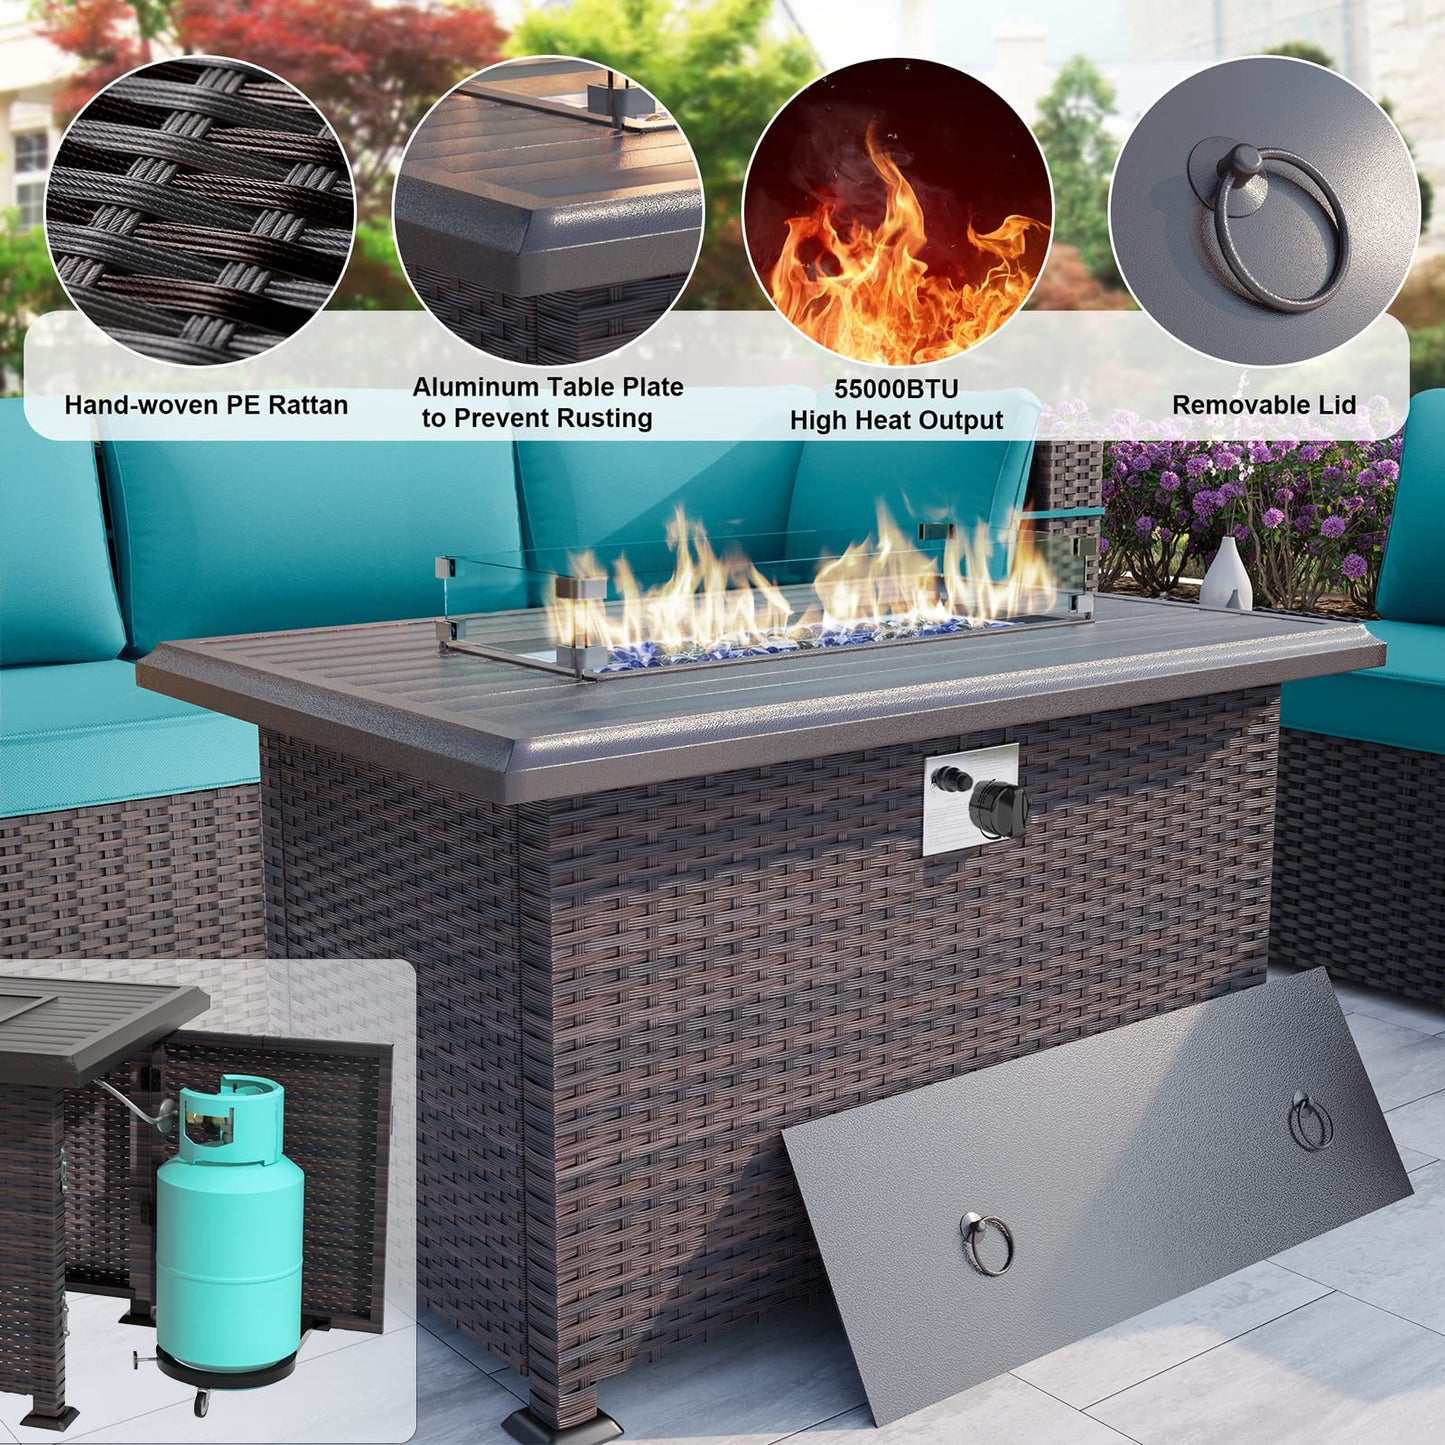 ALAULM 15 Pieces Outdoor Patio Furniture Set with Propane Fire Pit Table Outdoor Sectional Sofa Sets Patio Furniture